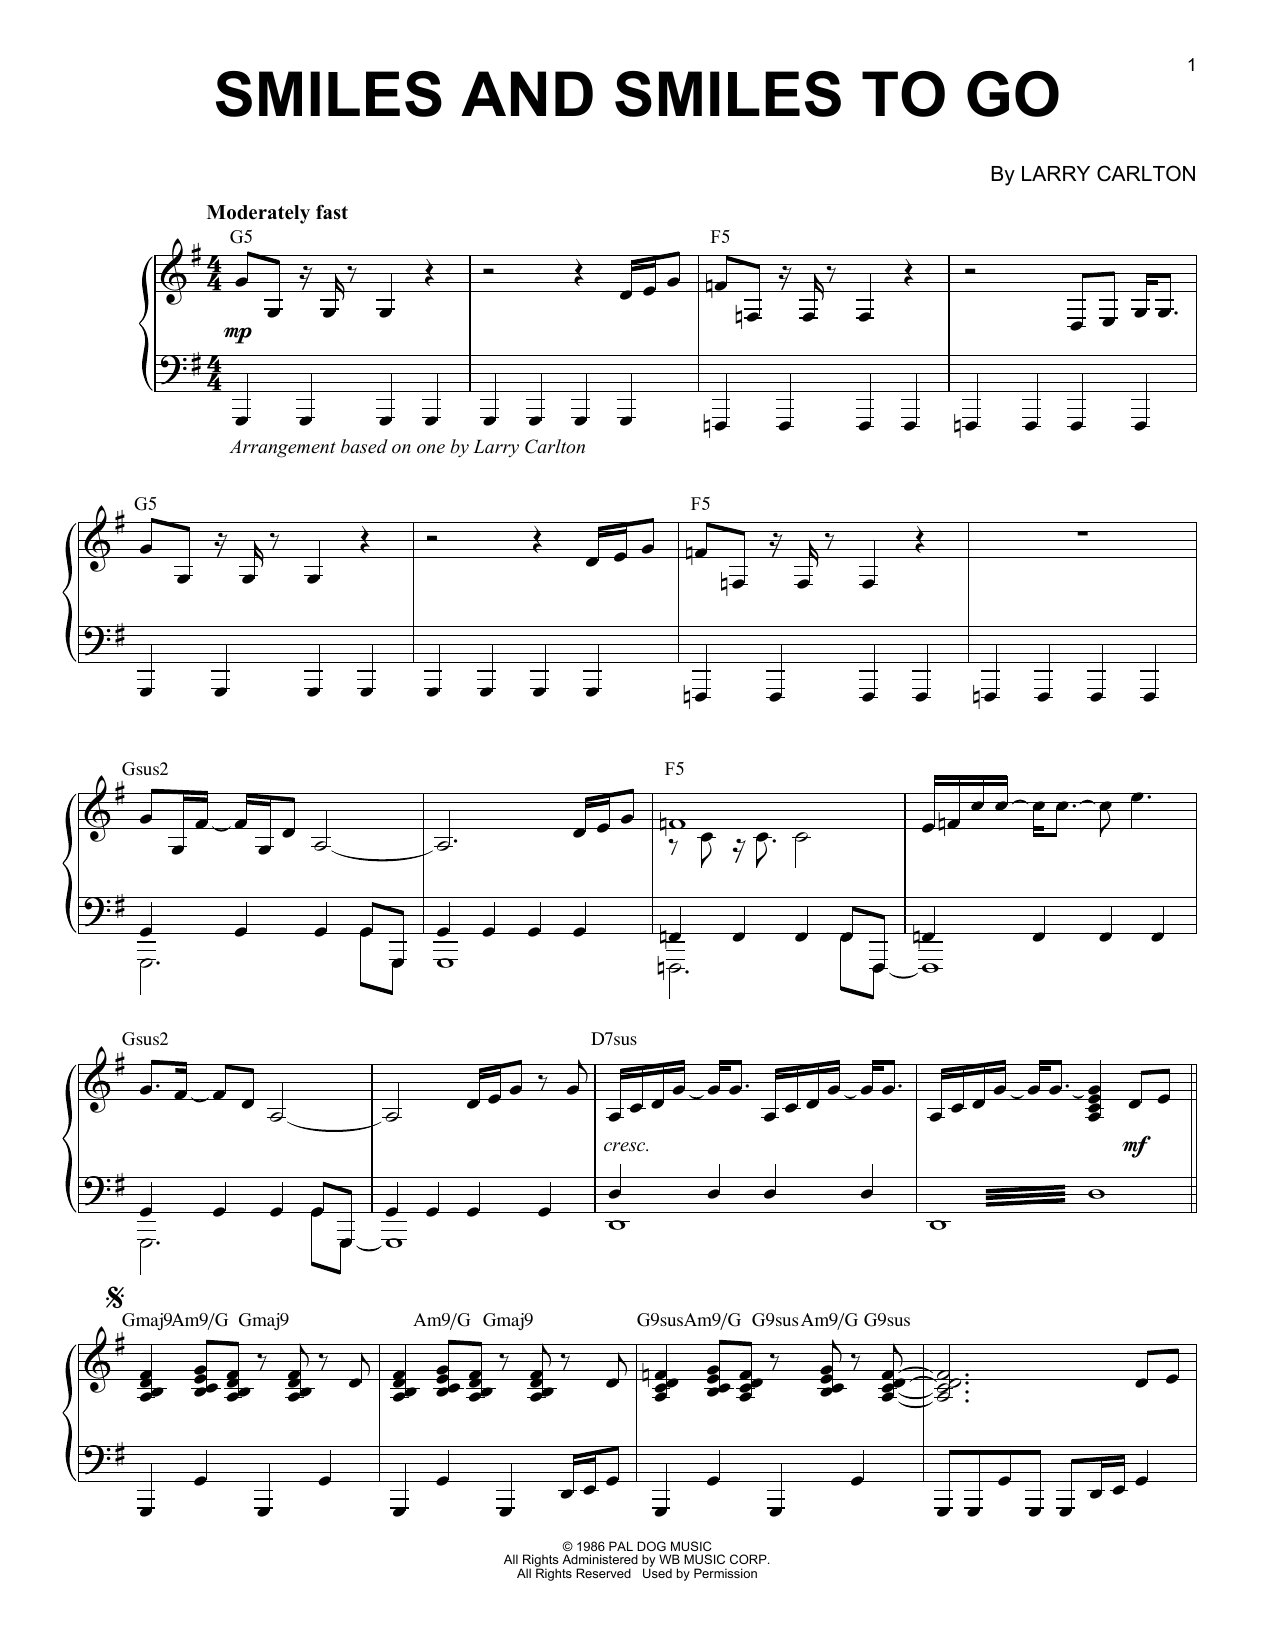 Download Larry Carlton Smiles And Smiles To Go Sheet Music